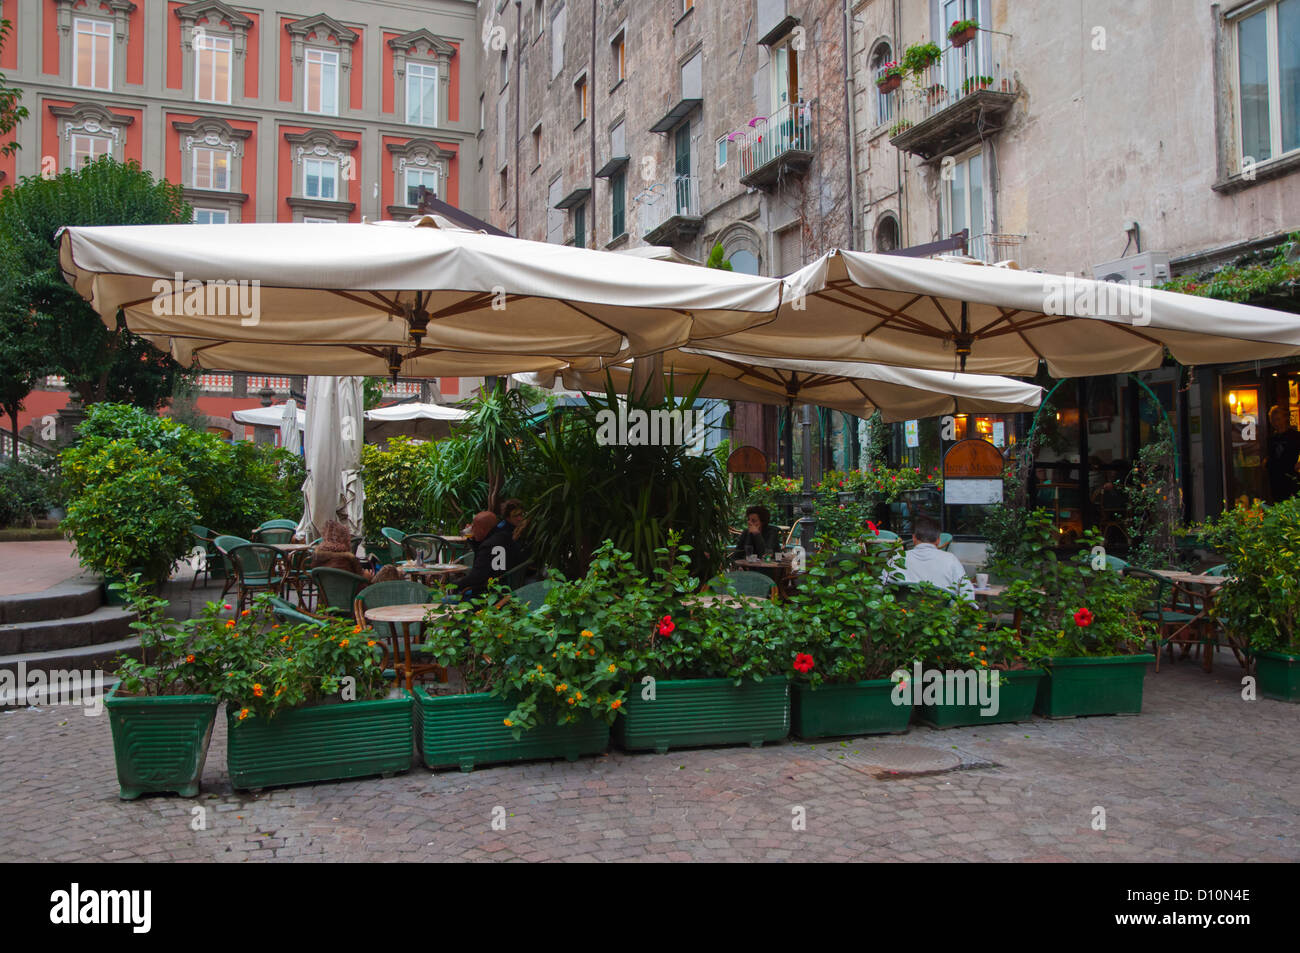 Bar cafe terrace during the day Piazza Bellini square centro storico the old town Naples city La Campania region southern Italy Stock Photo